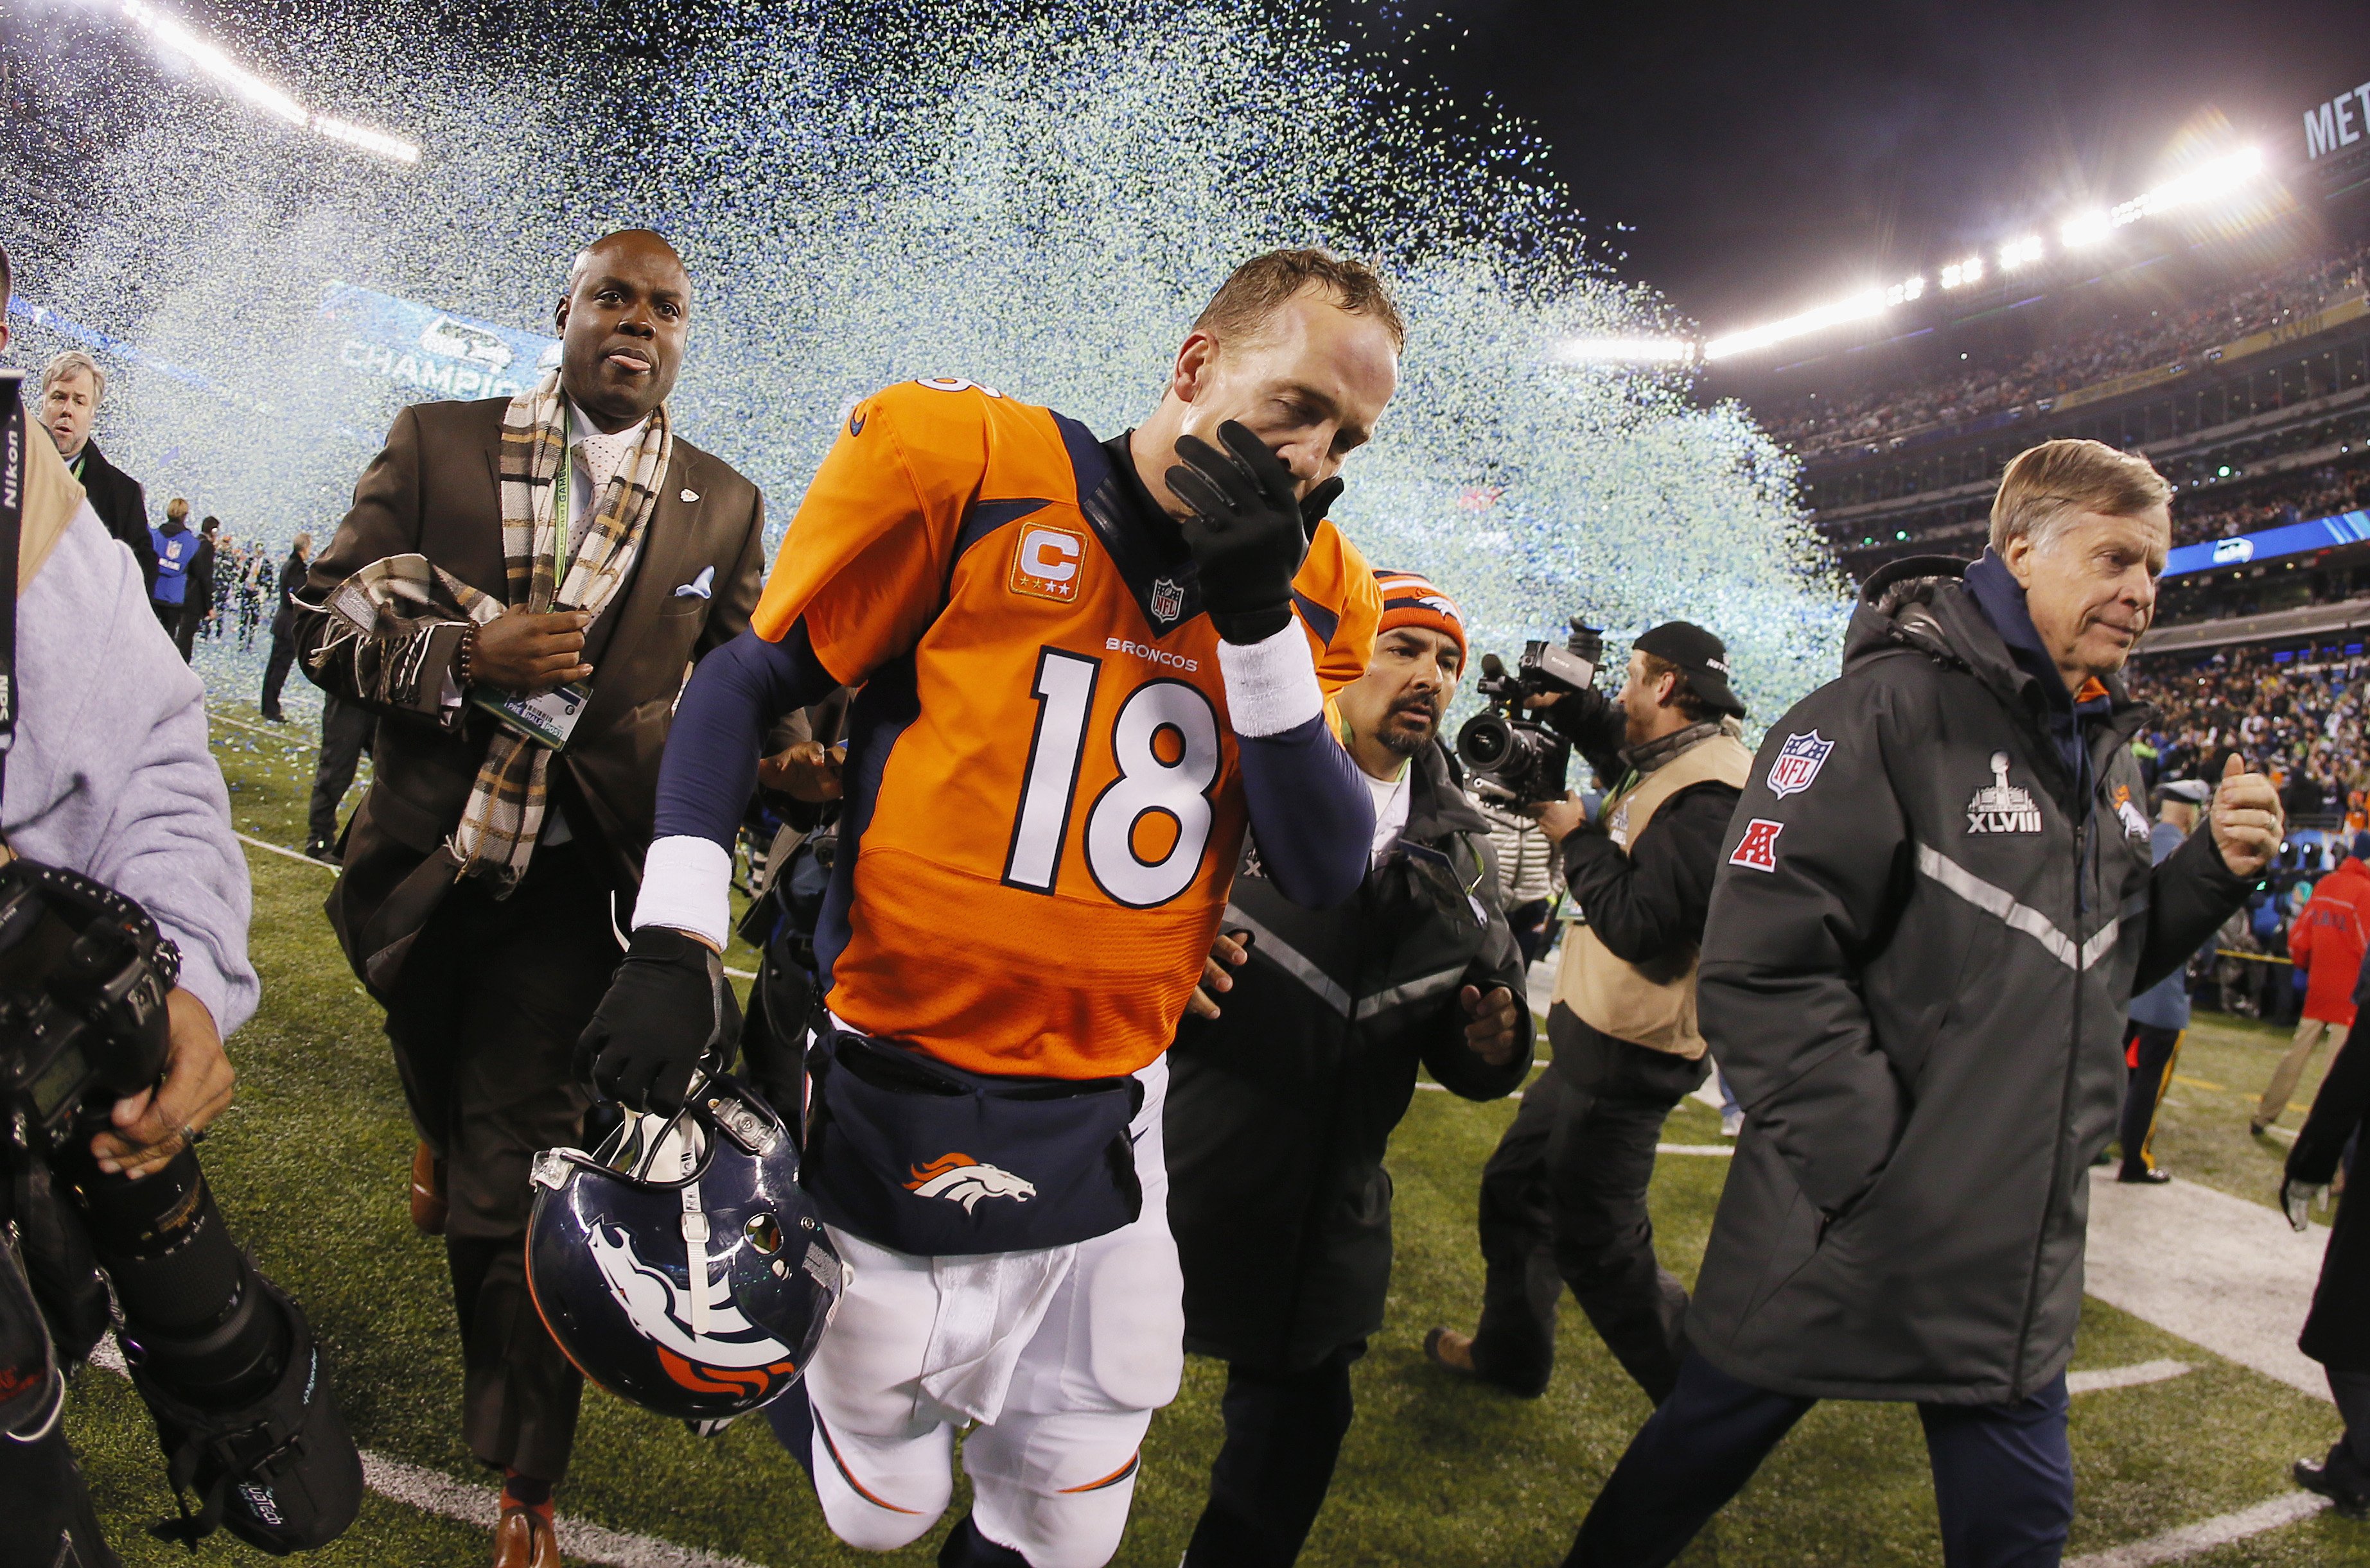 Quarterback Peyton Manning of the Denver Broncos reacts as he walks off the field after their 43-8 loss to the Seattle Seahawks during Super Bowl XLVIII. (Kevin C. Cox—Getty Images)